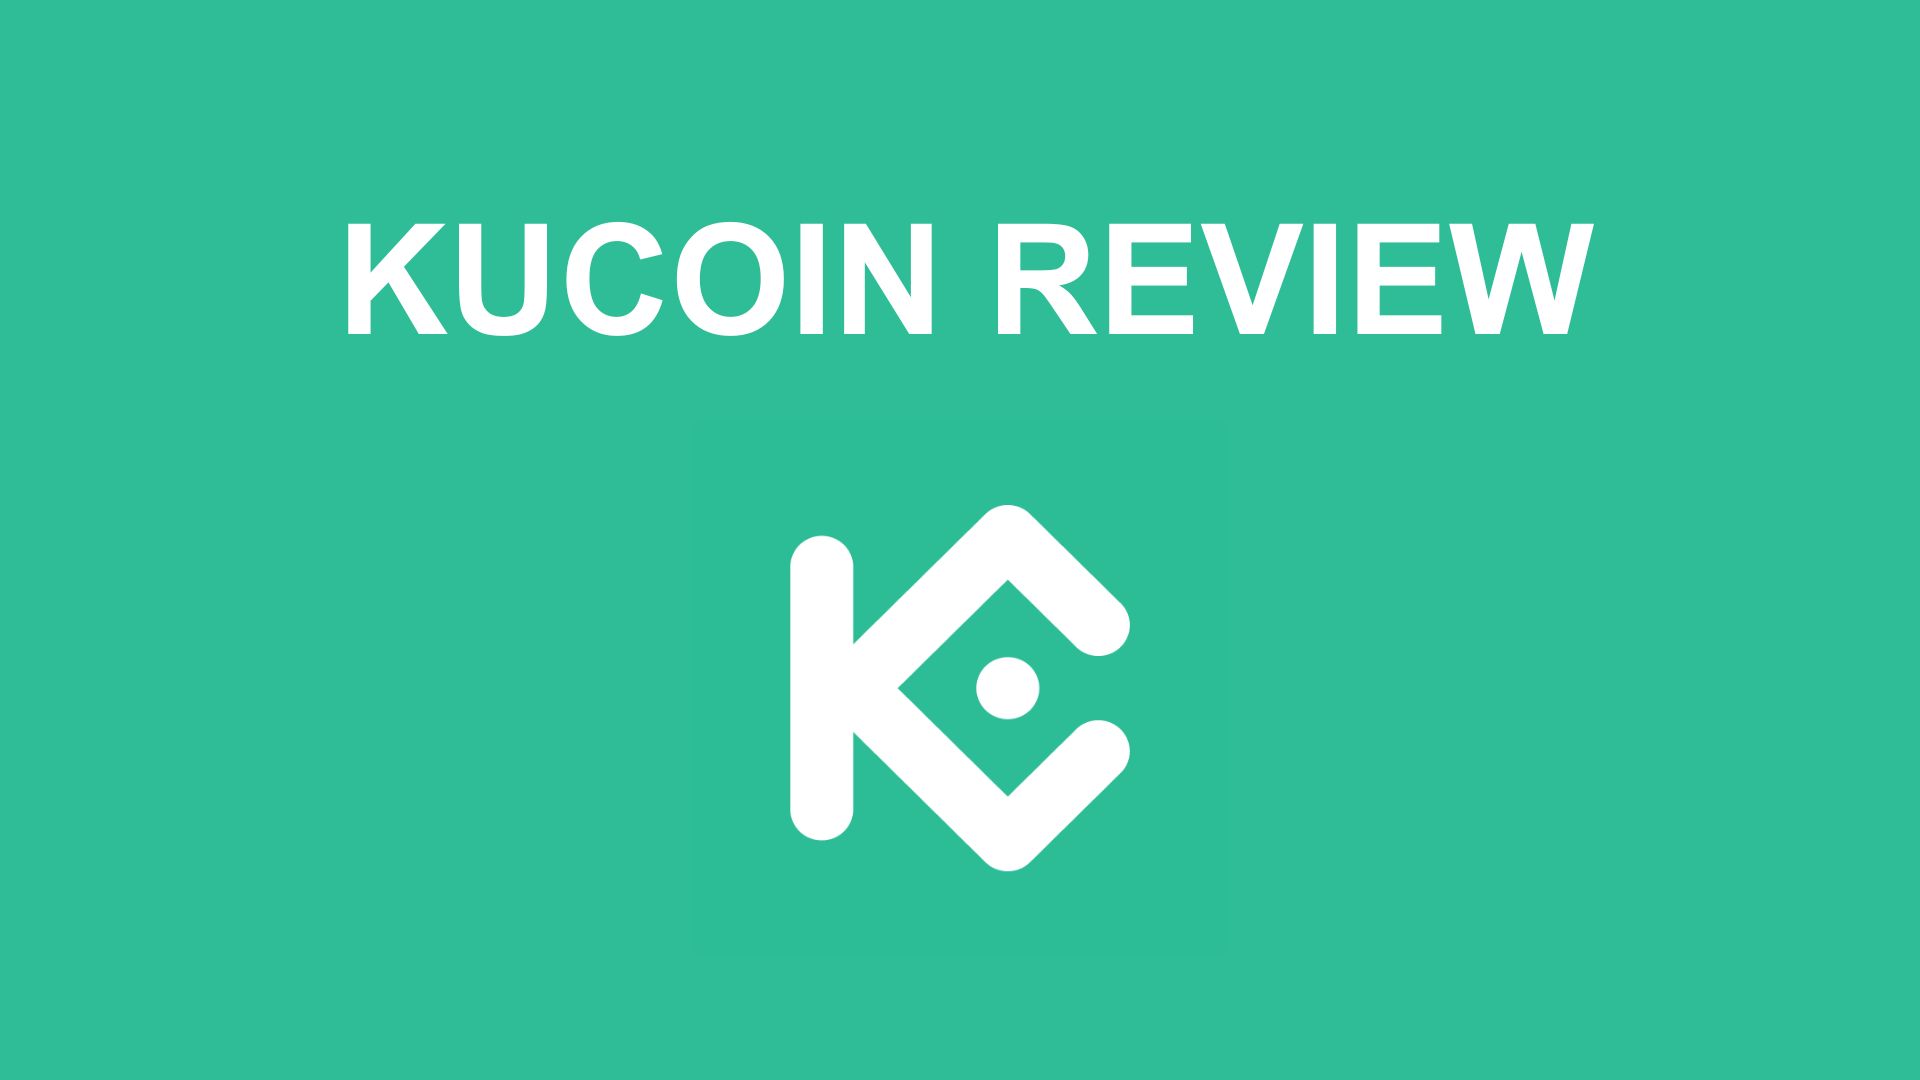 Kucoin Review